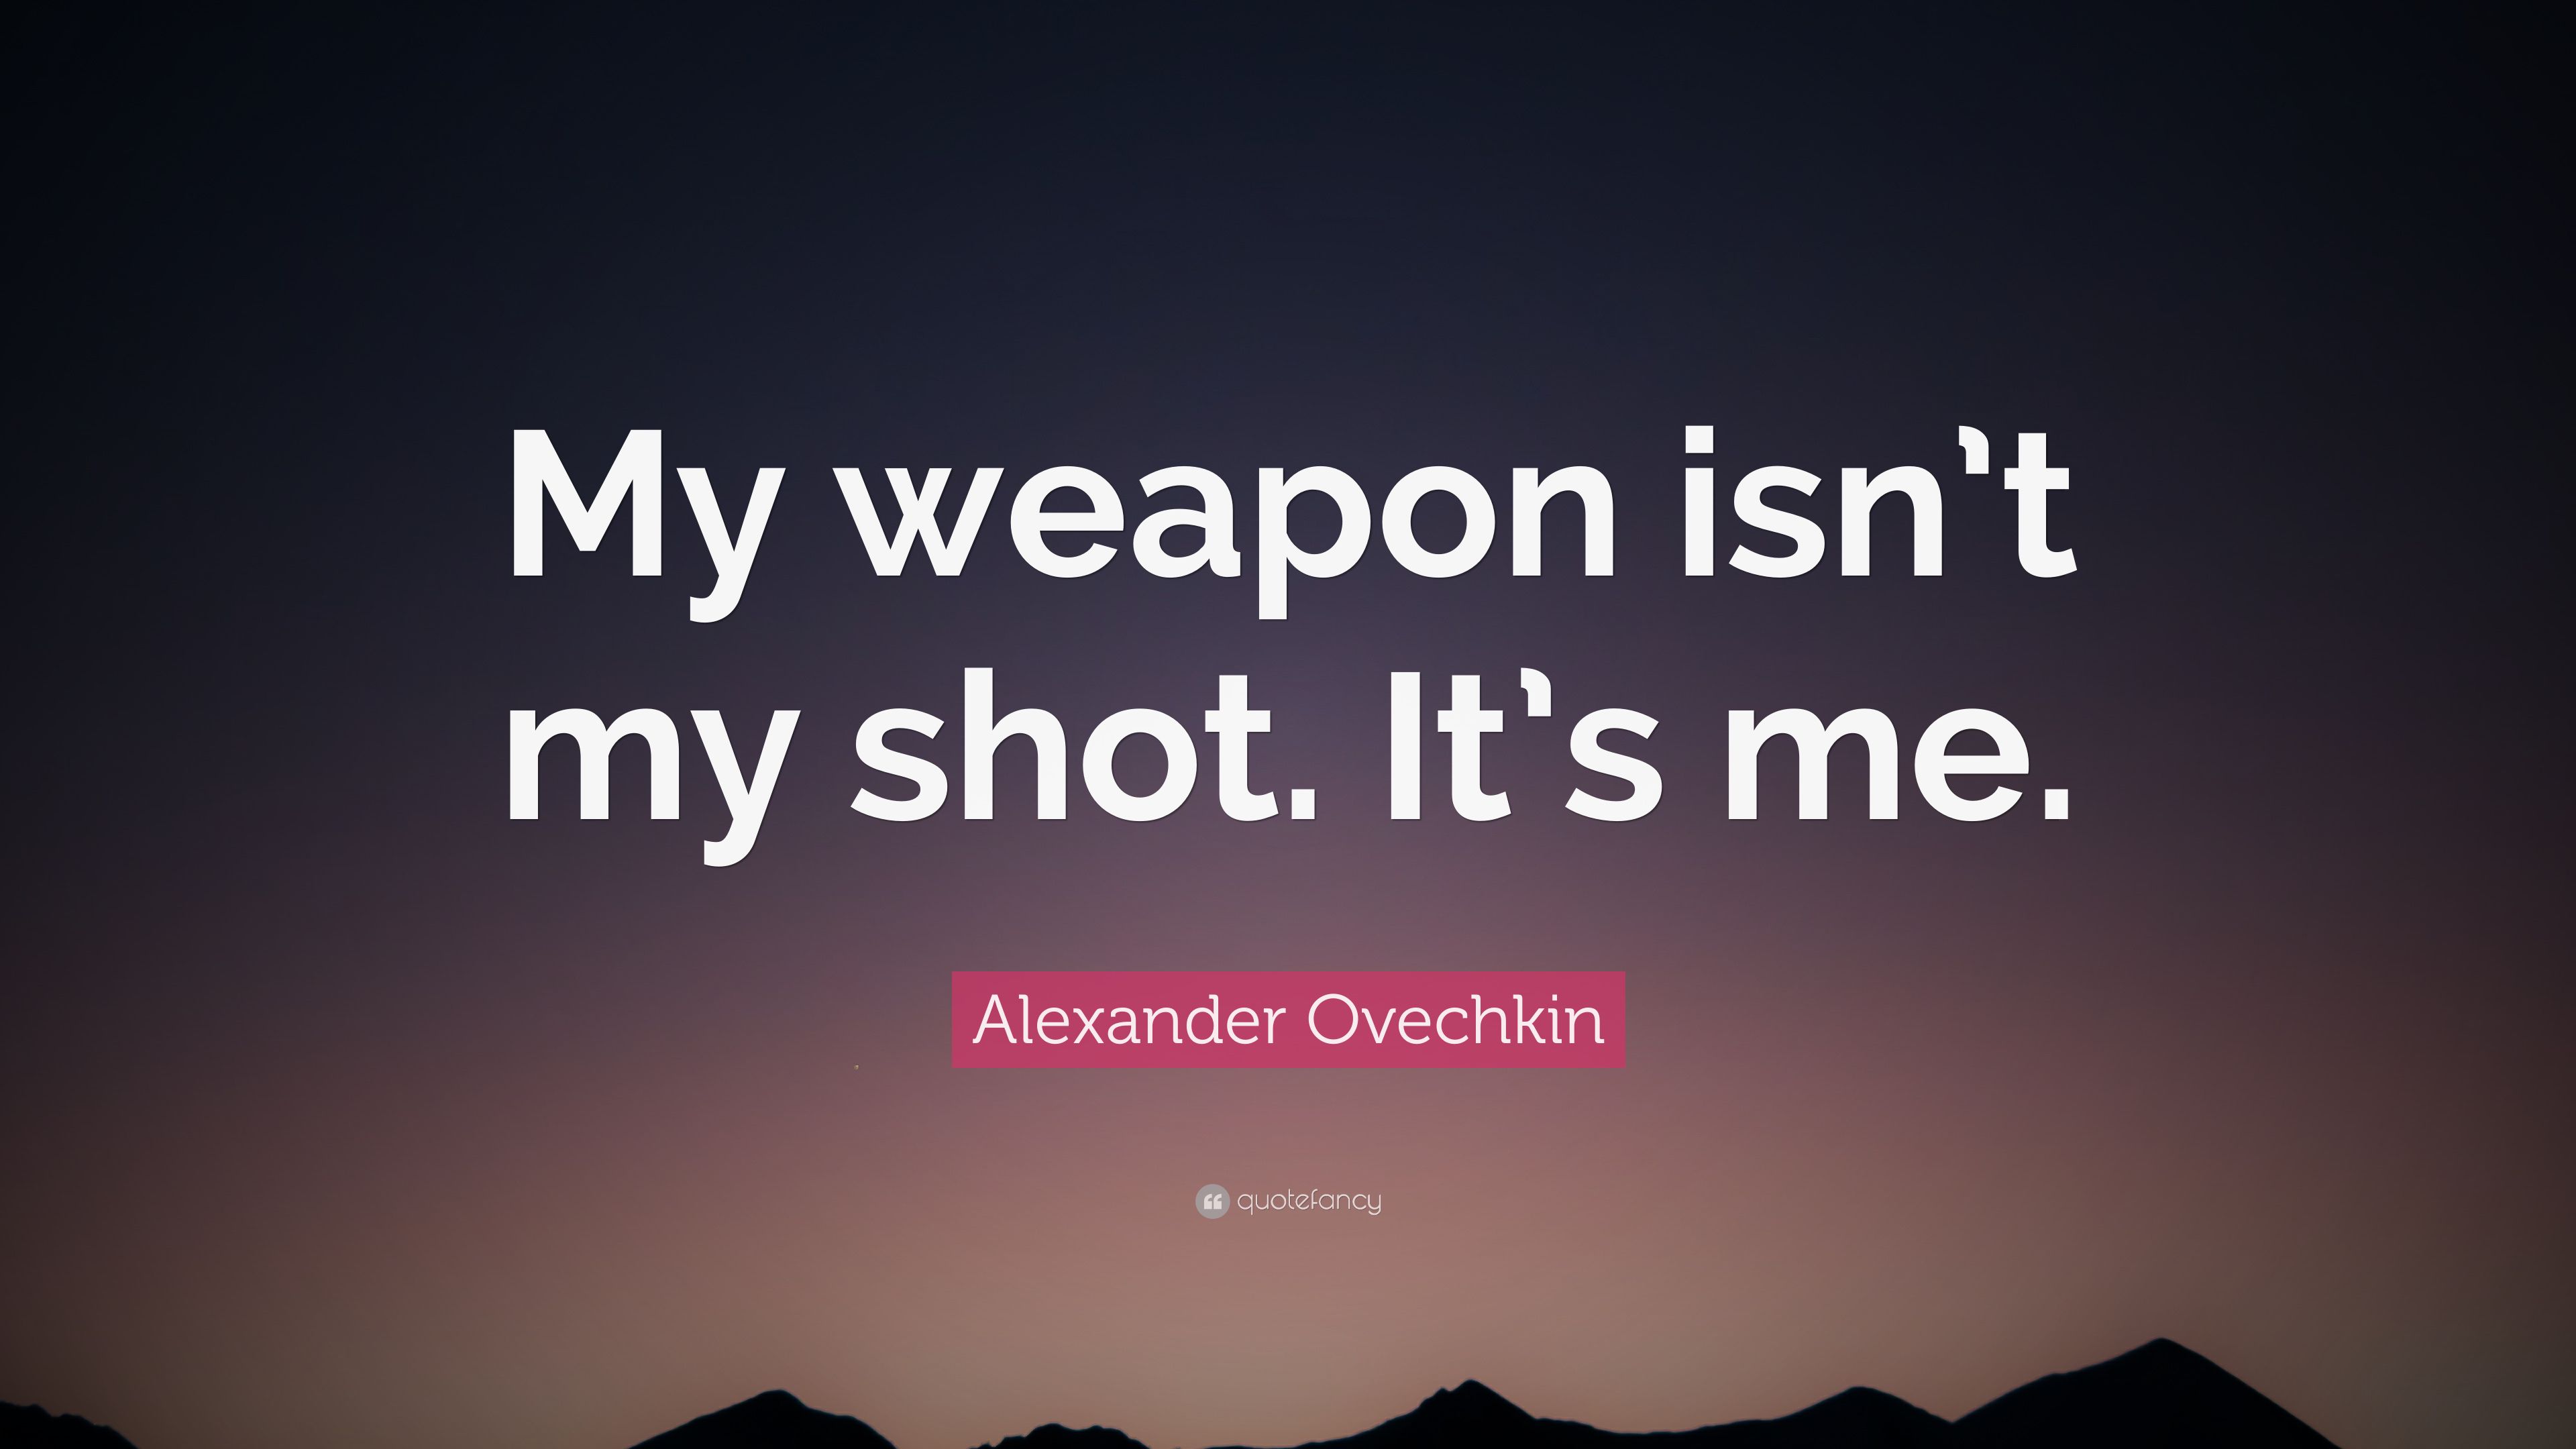 Alexander Ovechkin Quote: “My weapon isn't my shot. It's me.” 9